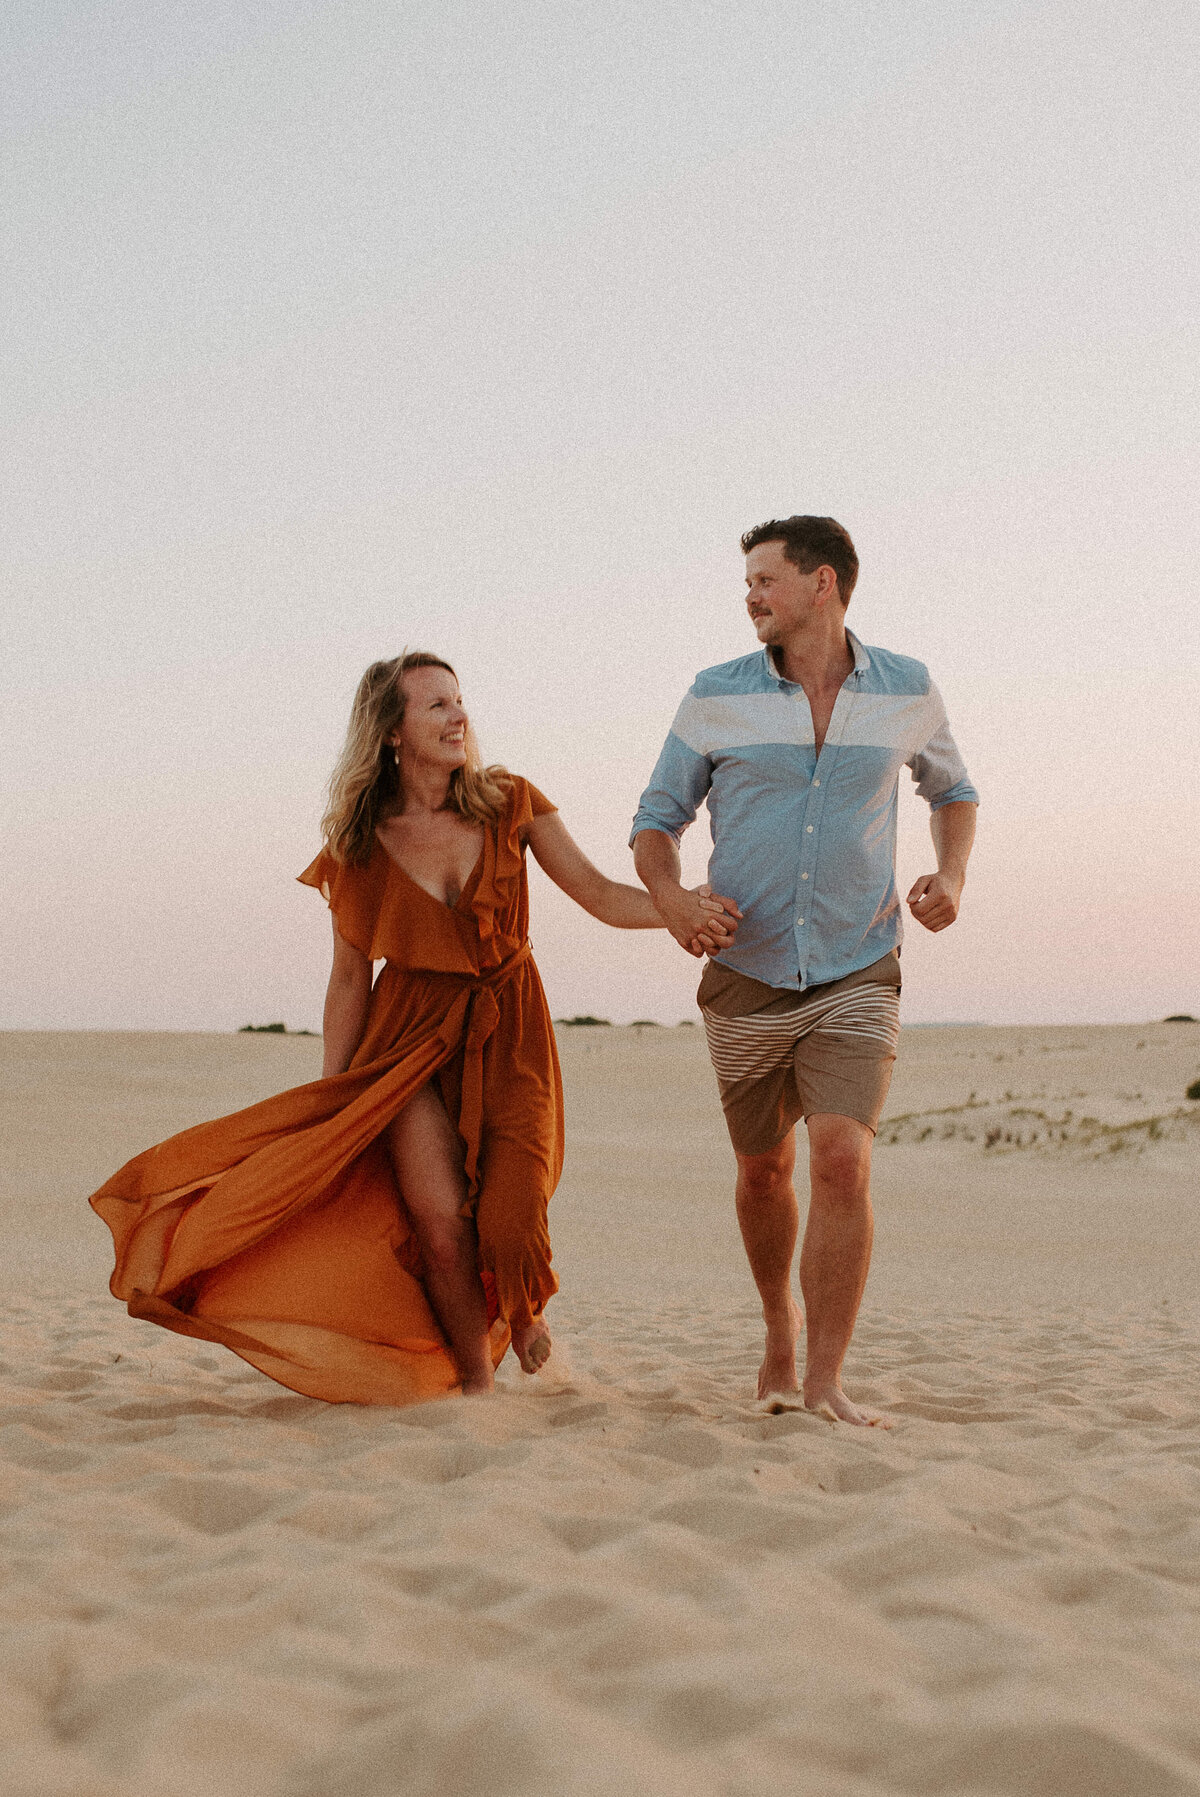 Running through the sands during an engagement session at Coral Pink Sand Dunes State Park in Kanab , Utah at sunset wearing a Baltic Born dress.